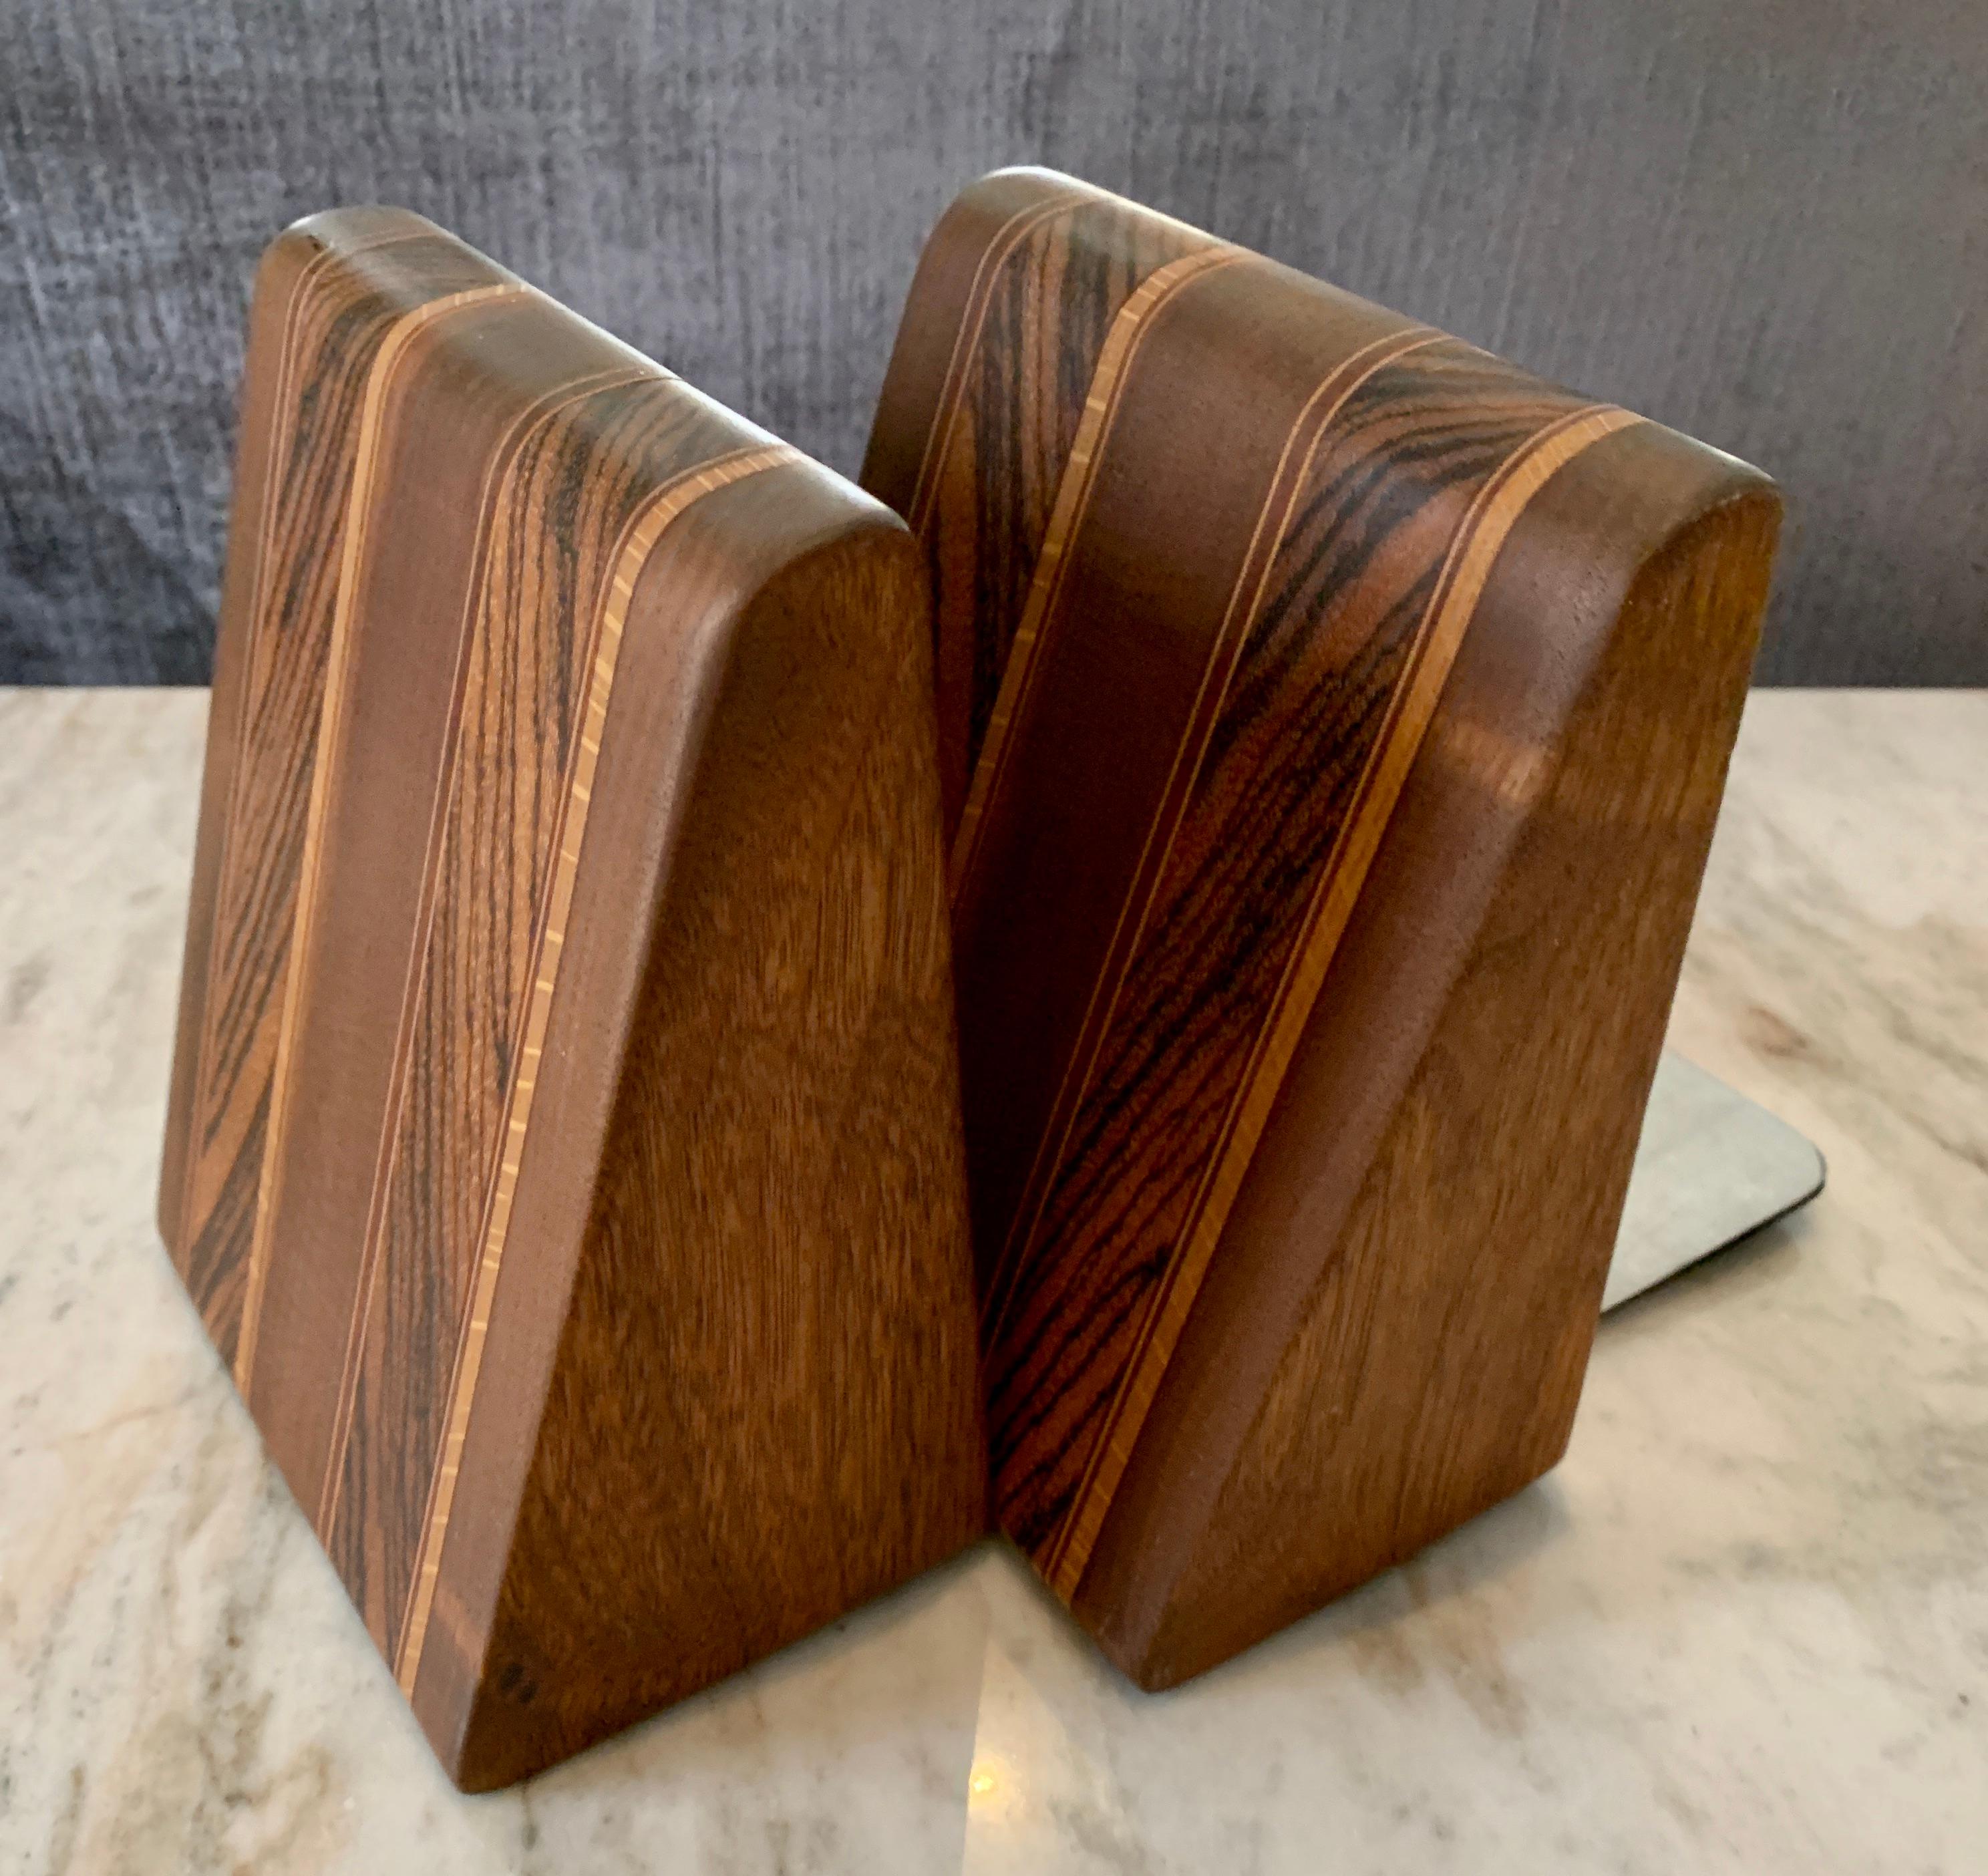 20th Century Angular Inlay Patterned Wooden Bookends with Metal Slide